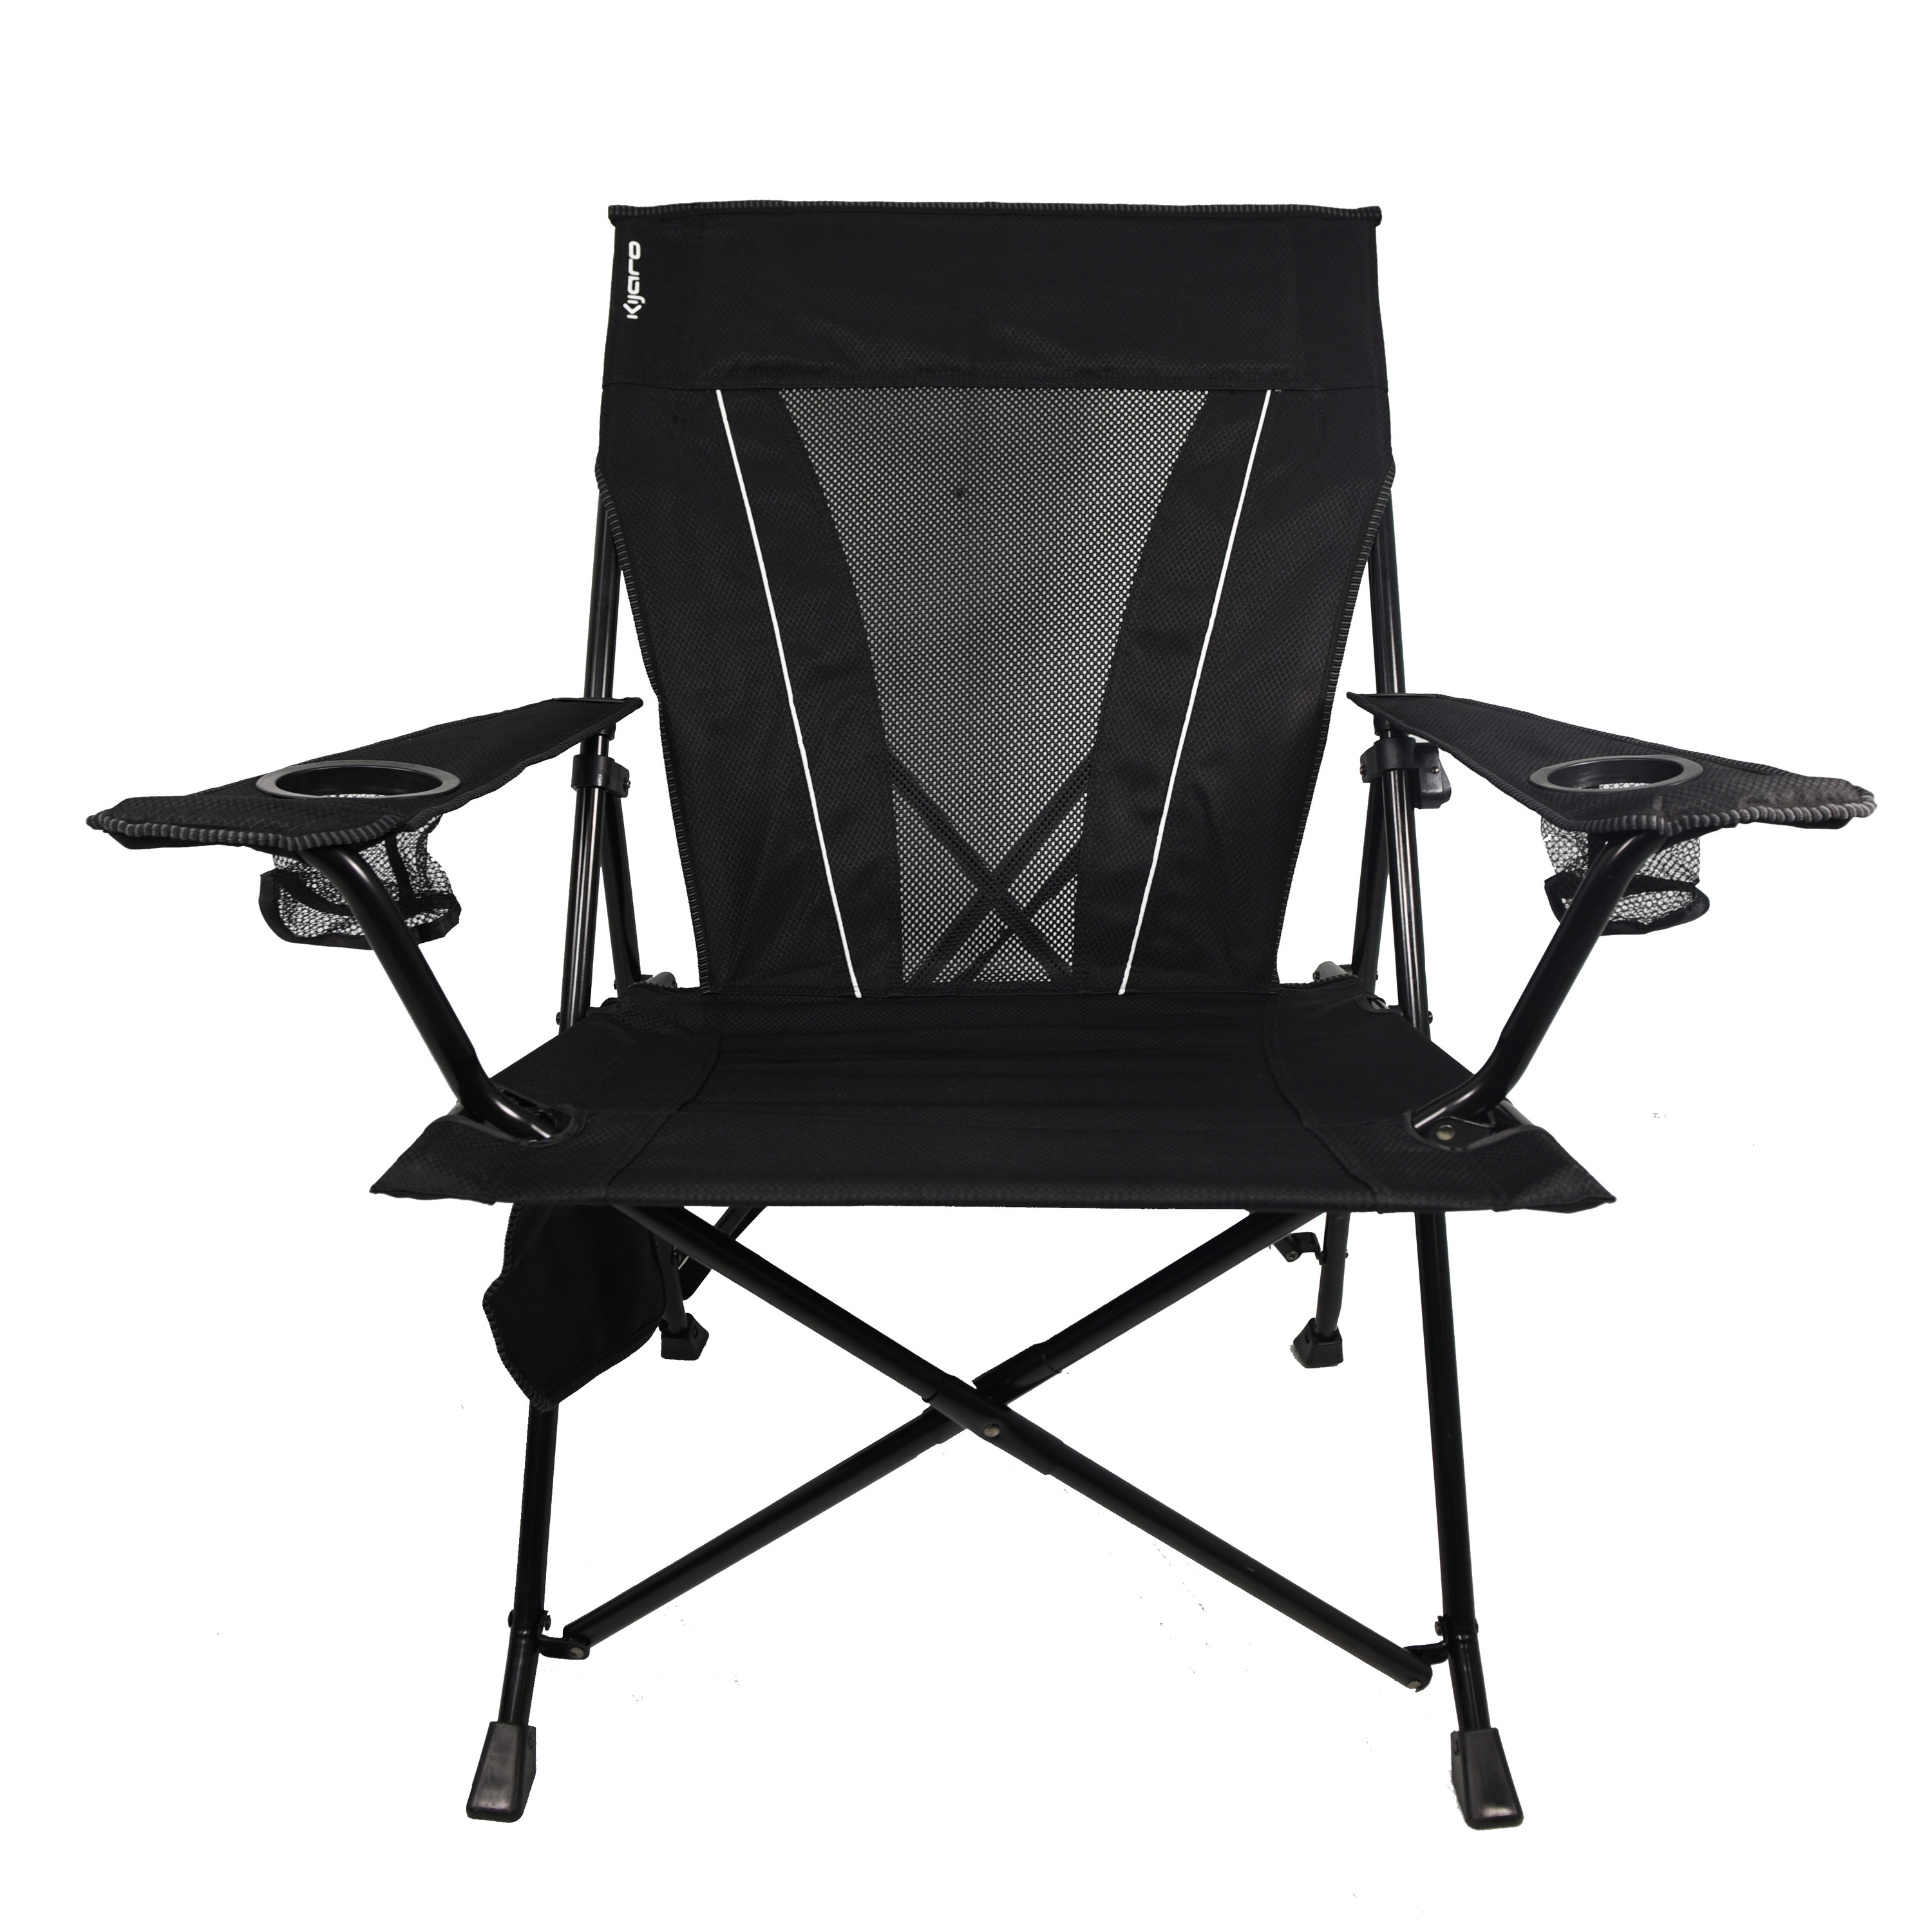 An image of a black camping and sports adult chair